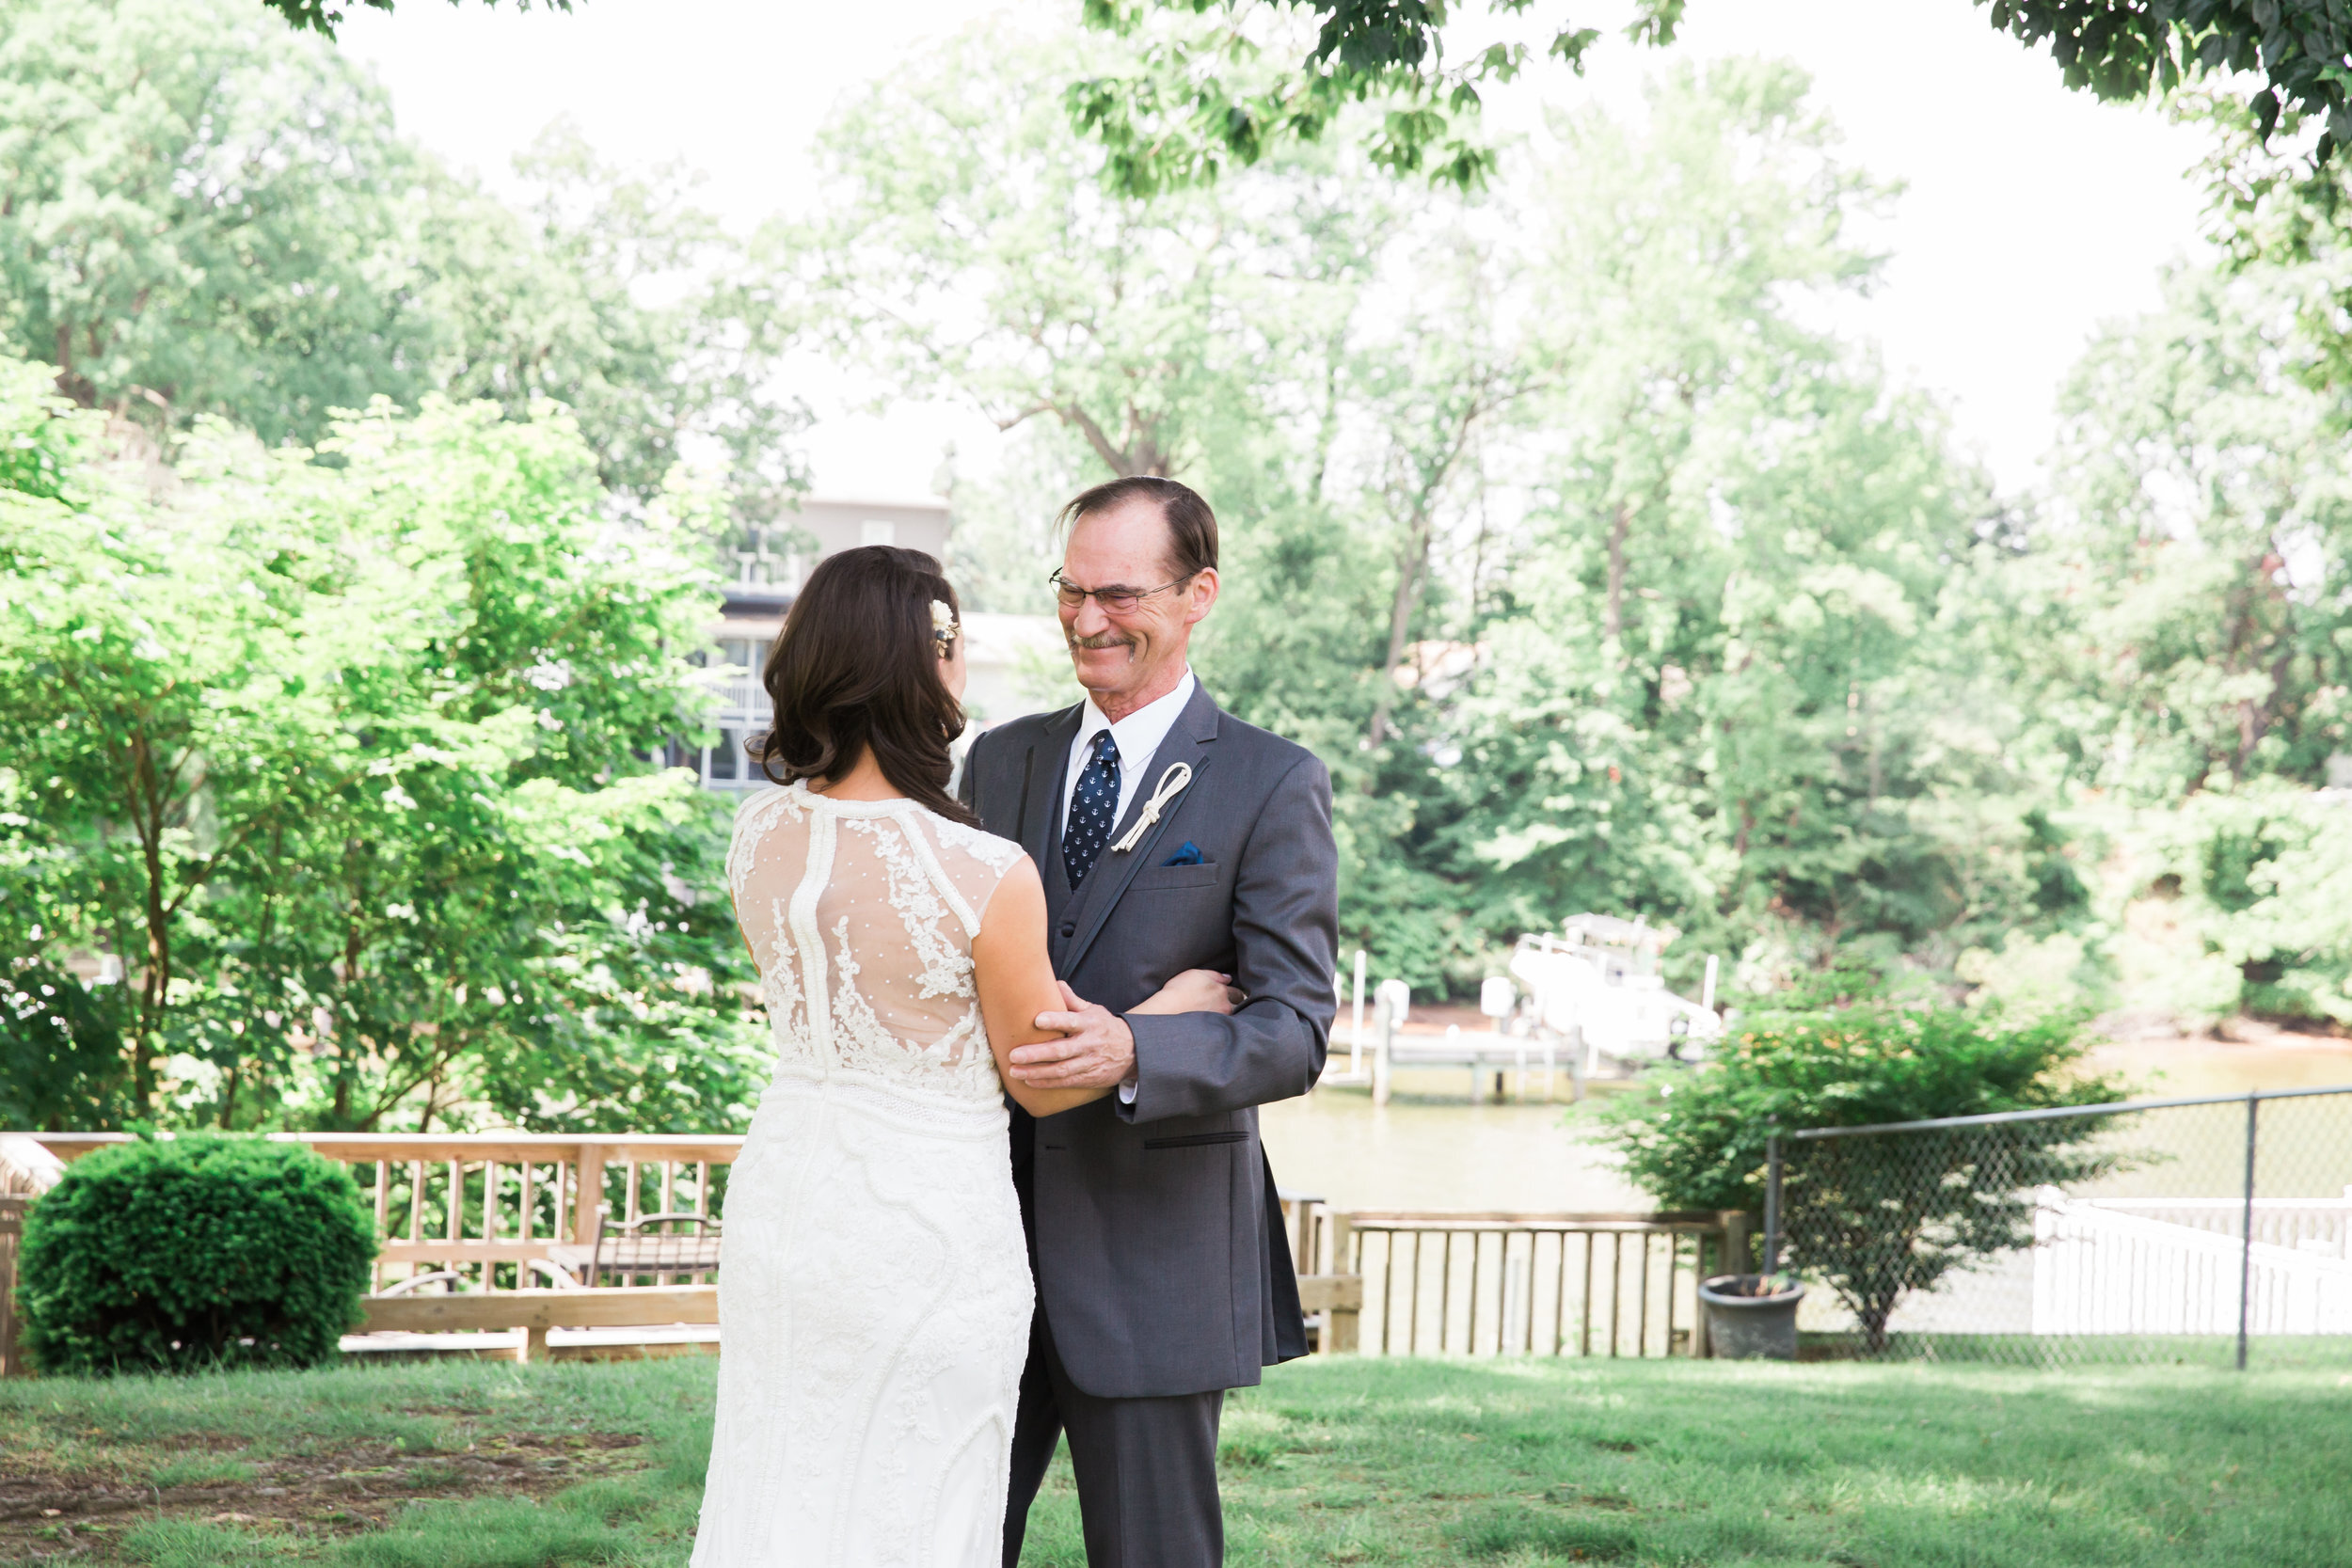 Sweet Wedding Photo First Look with Dad Megapixels Media Photography Baltimore Maryland Photographers.jpg